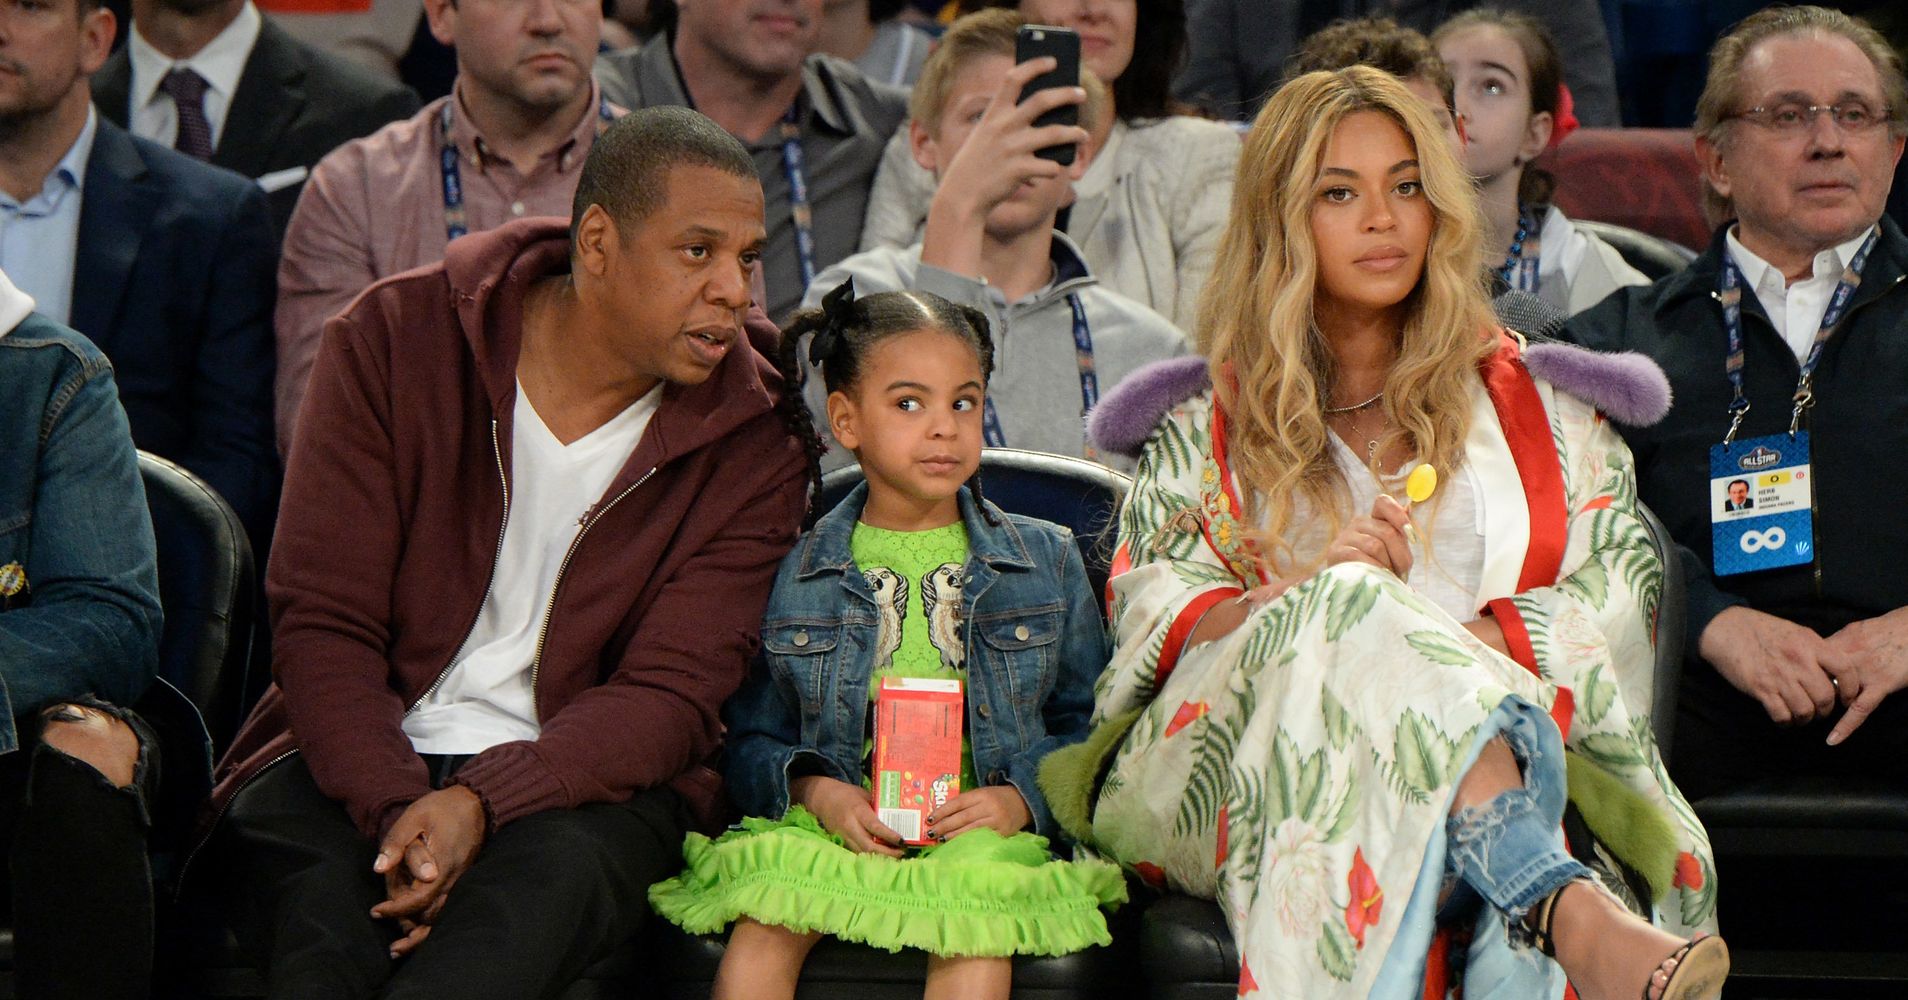 Beyoncé Reportedly Looking To Buy Ownership Stake In Houston Rockets